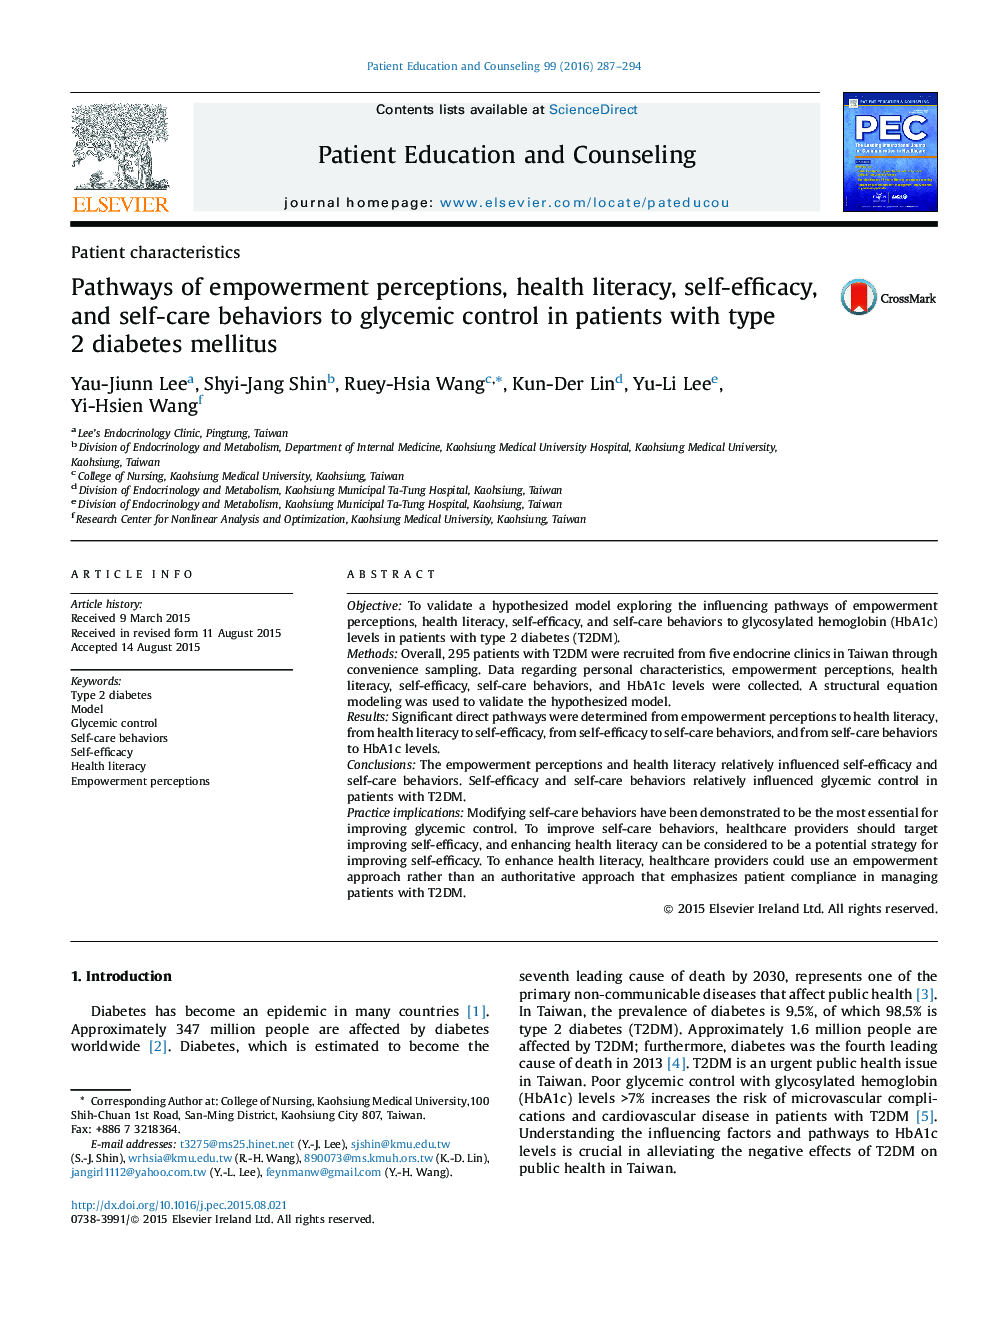 Pathways of empowerment perceptions, health literacy, self-efficacy, and self-care behaviors to glycemic control in patients with type 2 diabetes mellitus